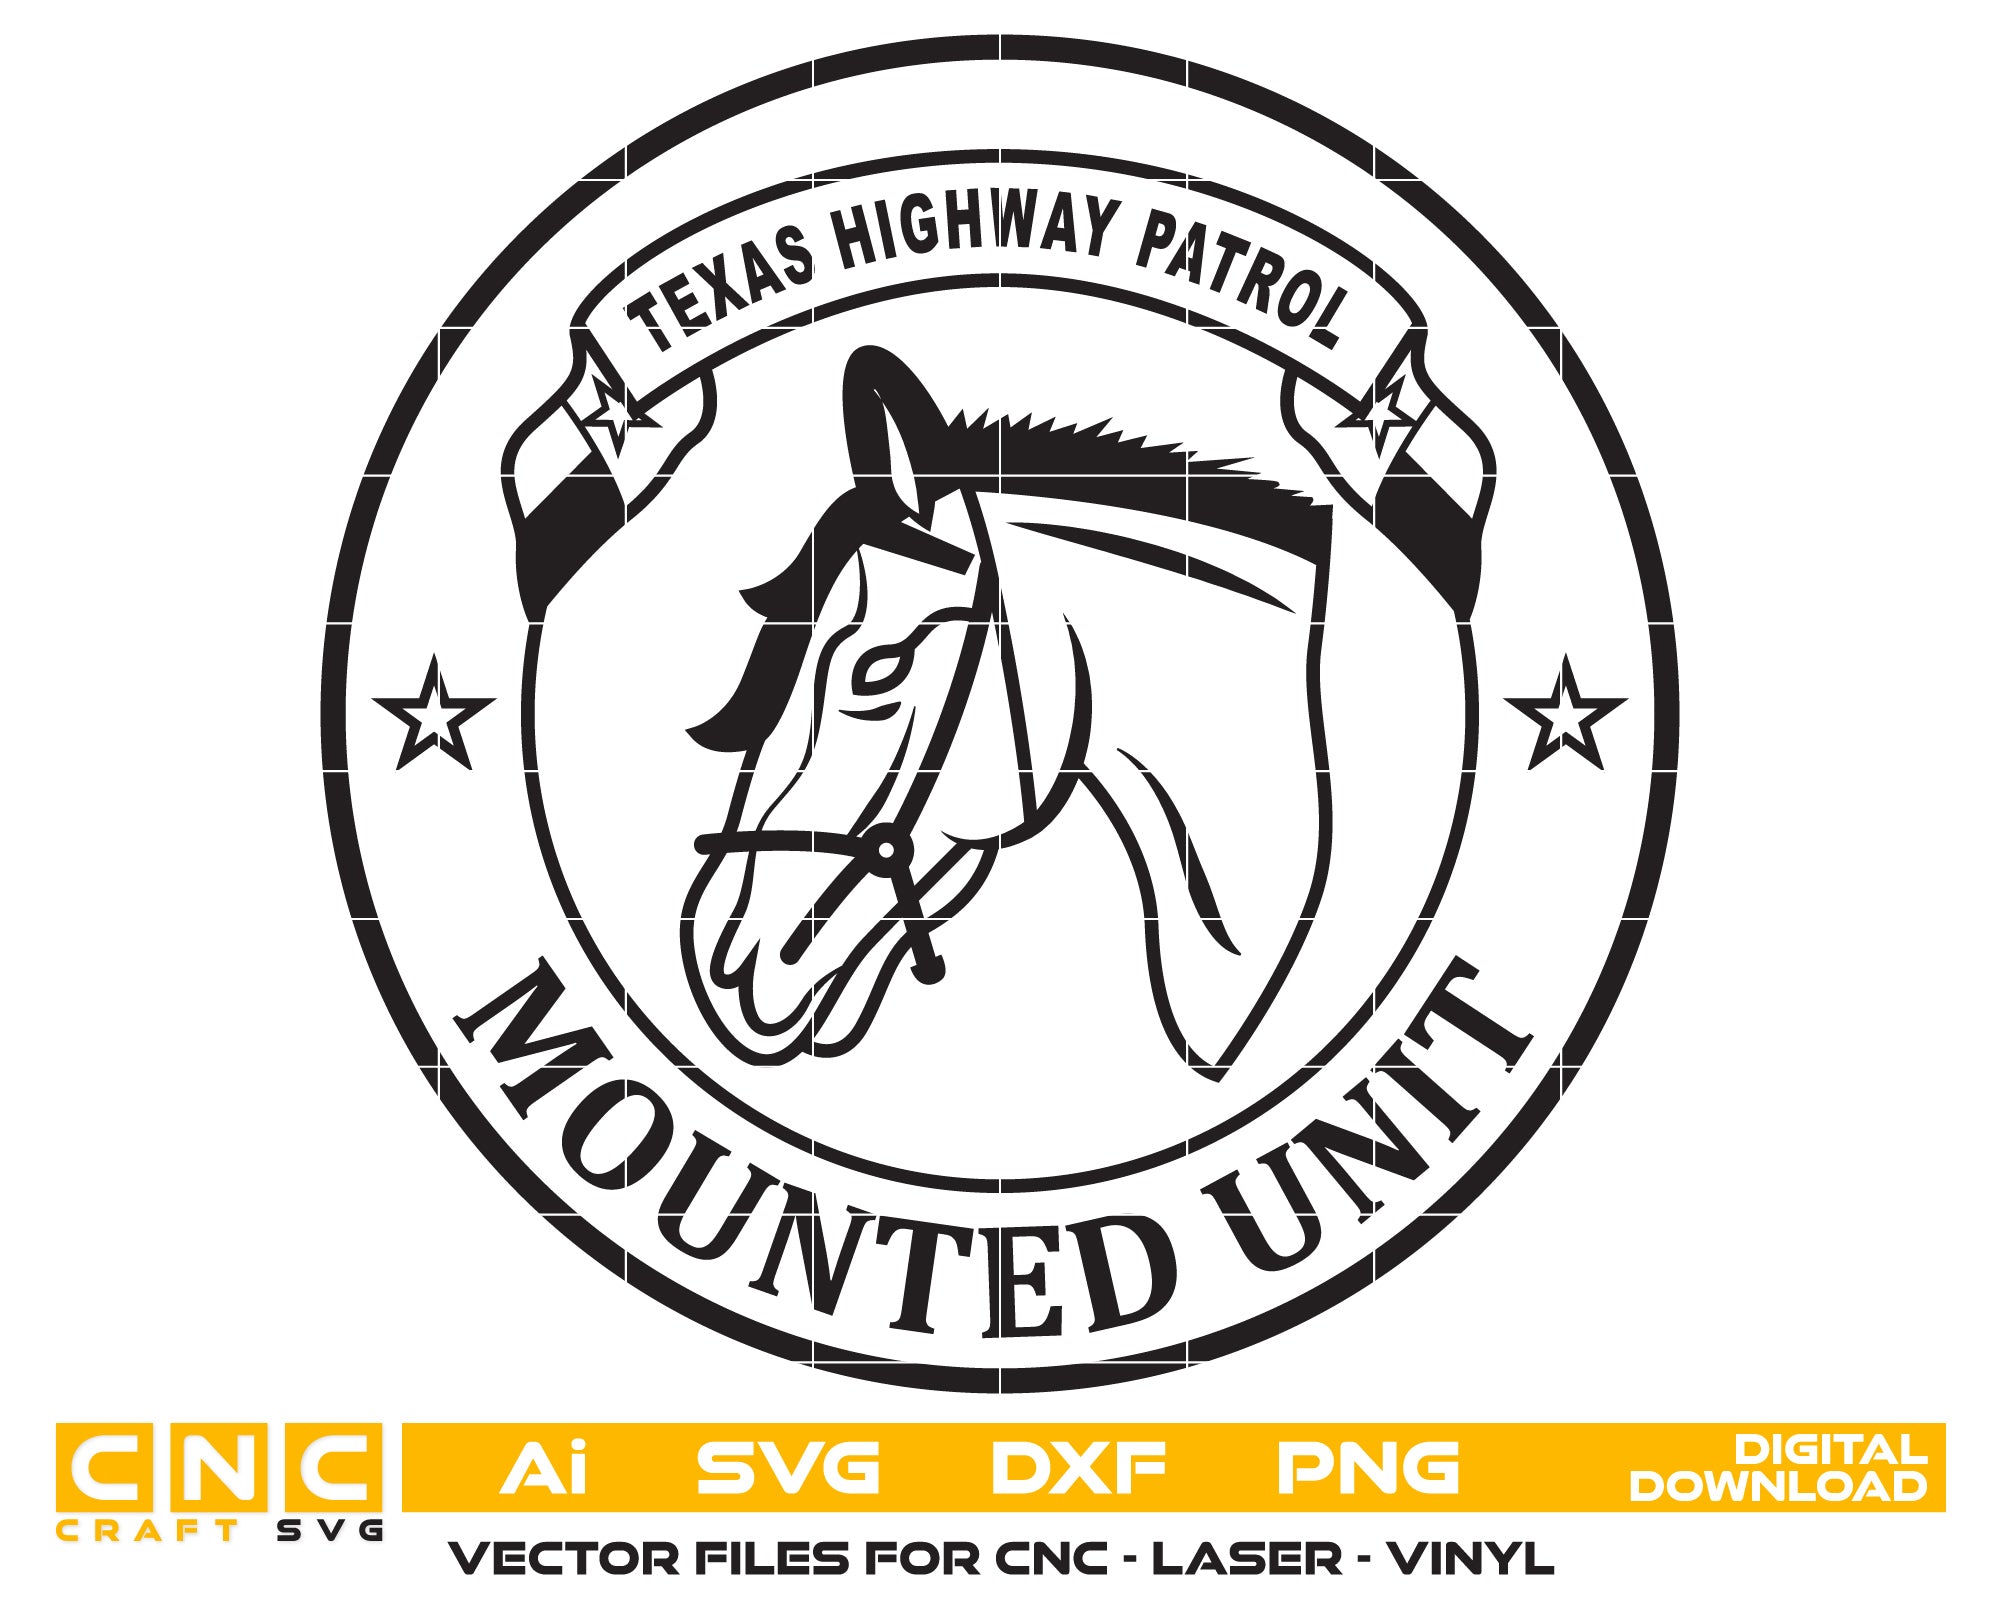 Texas Highway Patrol Mounted Unit Vector Art, Ai,SVG, DXF, PNG, Digital Files